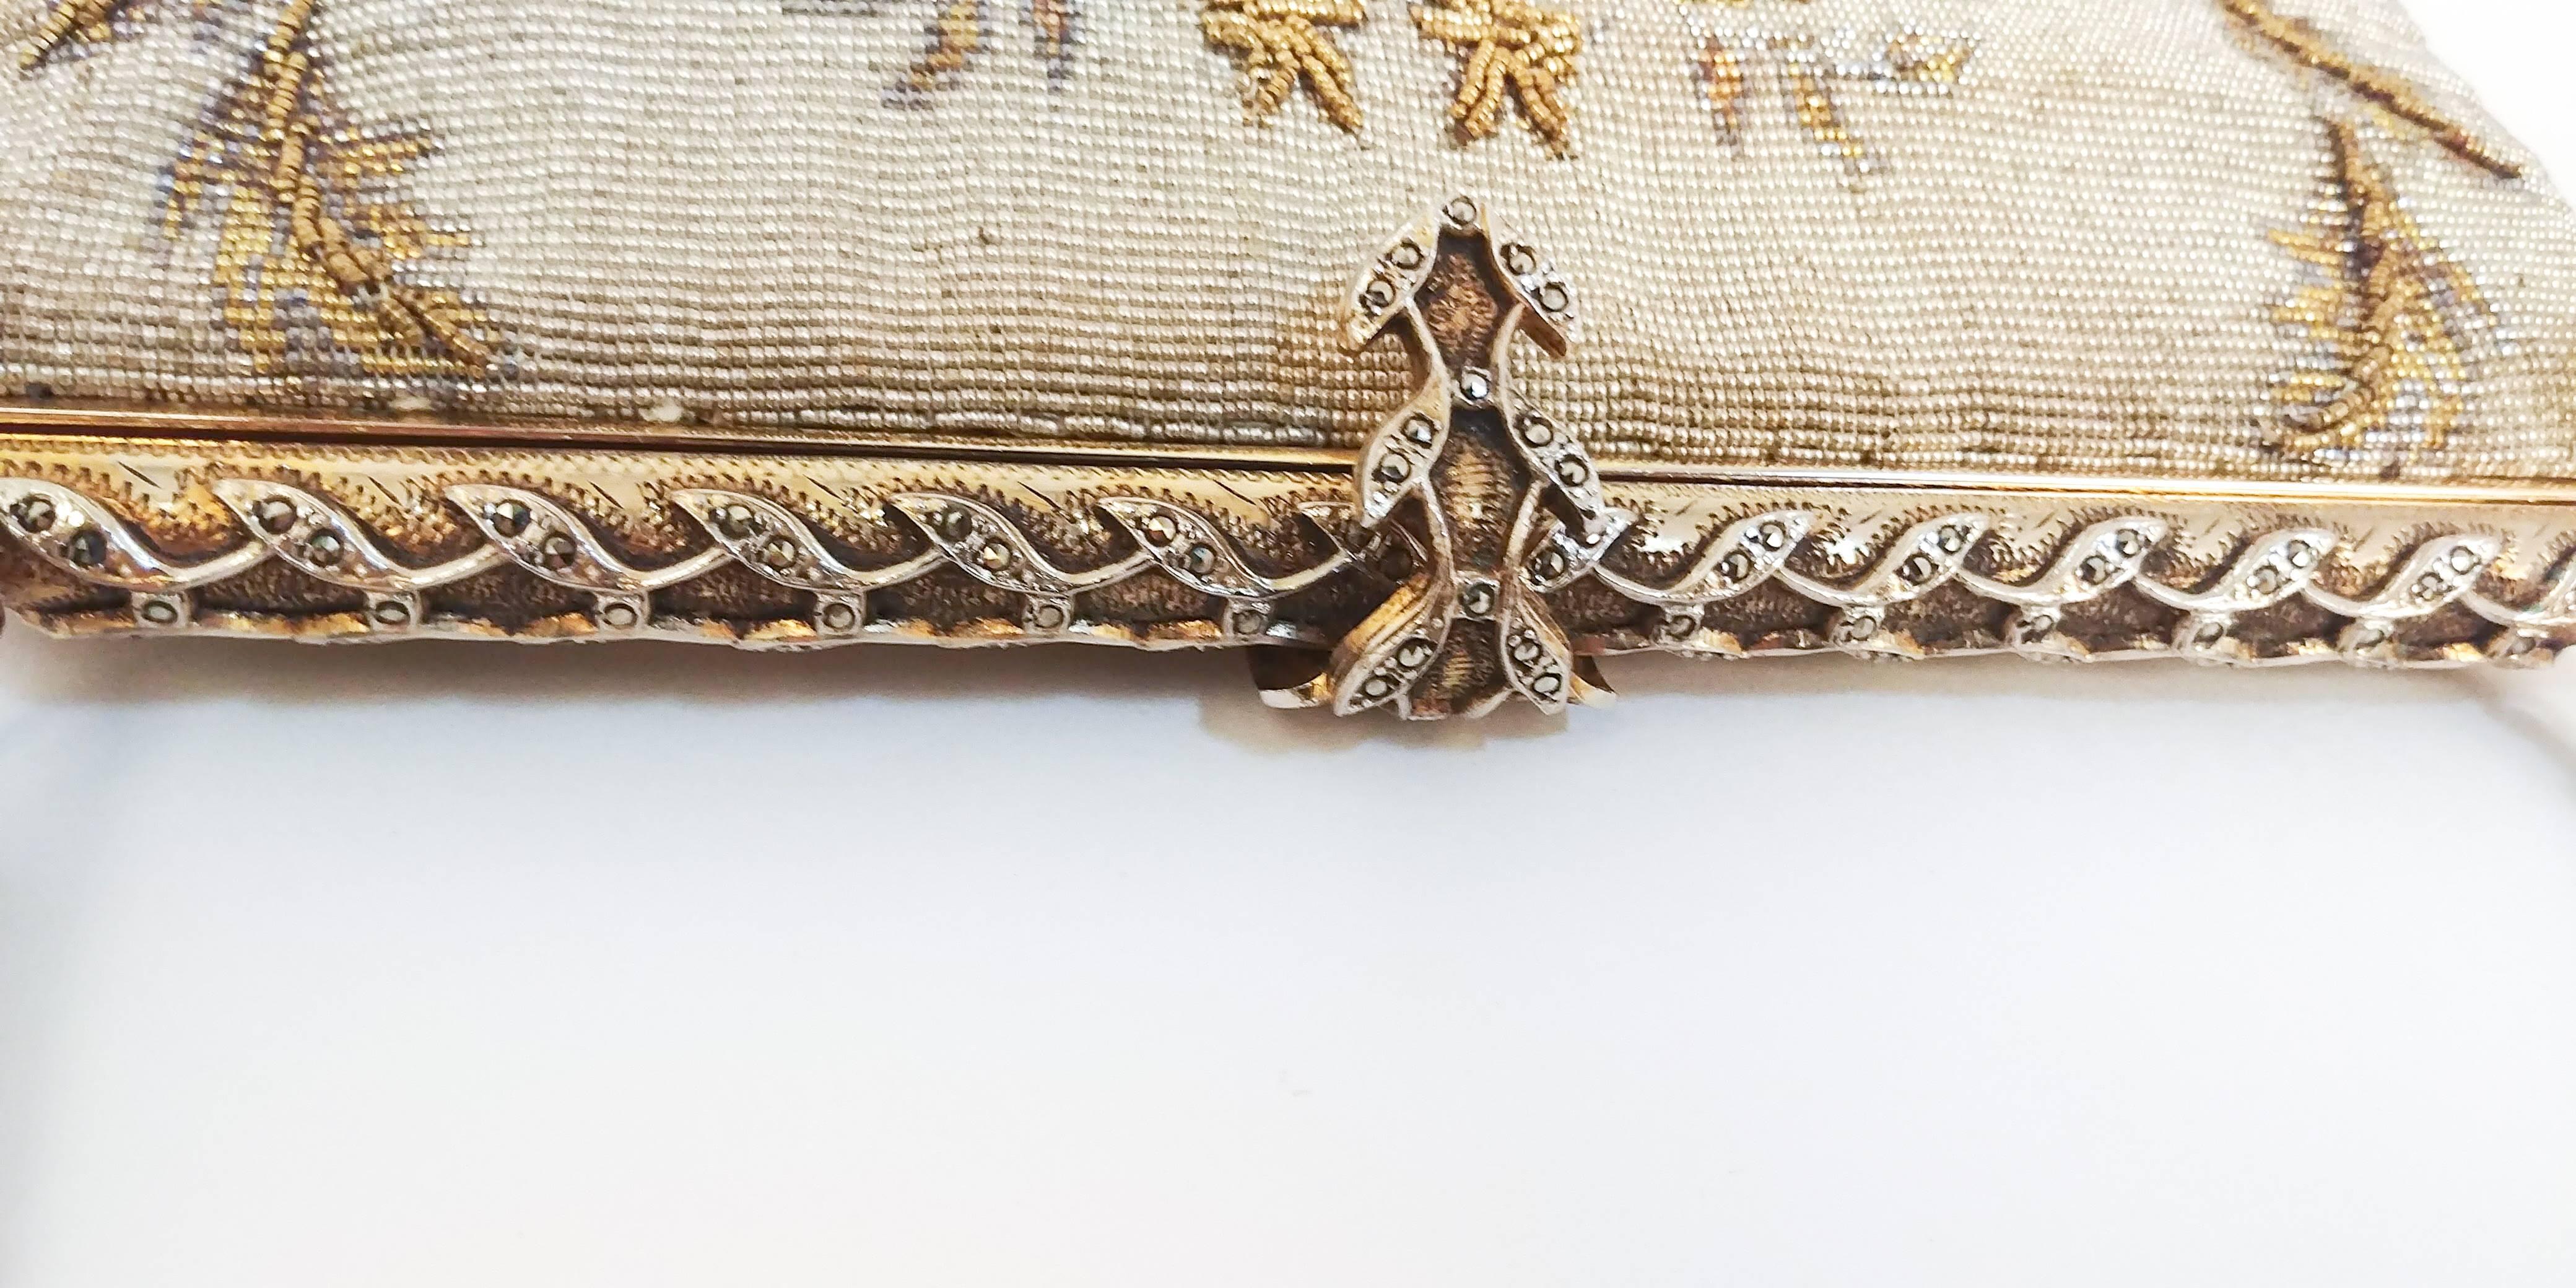 1960s Metal Embroidered Purse. Silver & gold tones go with any outfit.